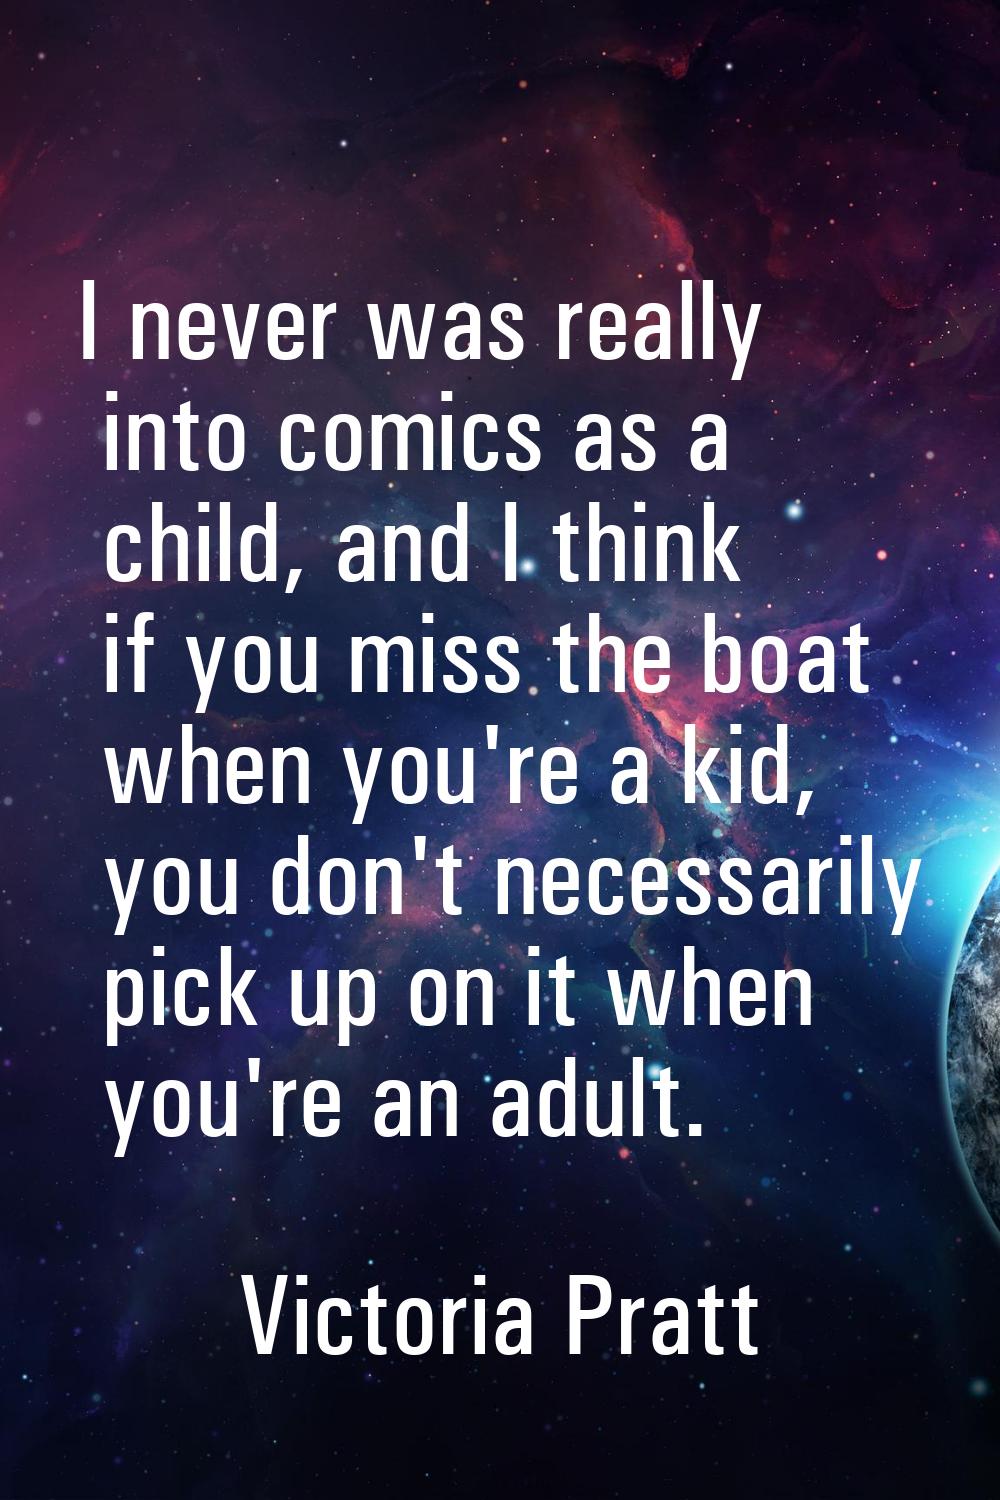 I never was really into comics as a child, and I think if you miss the boat when you're a kid, you 